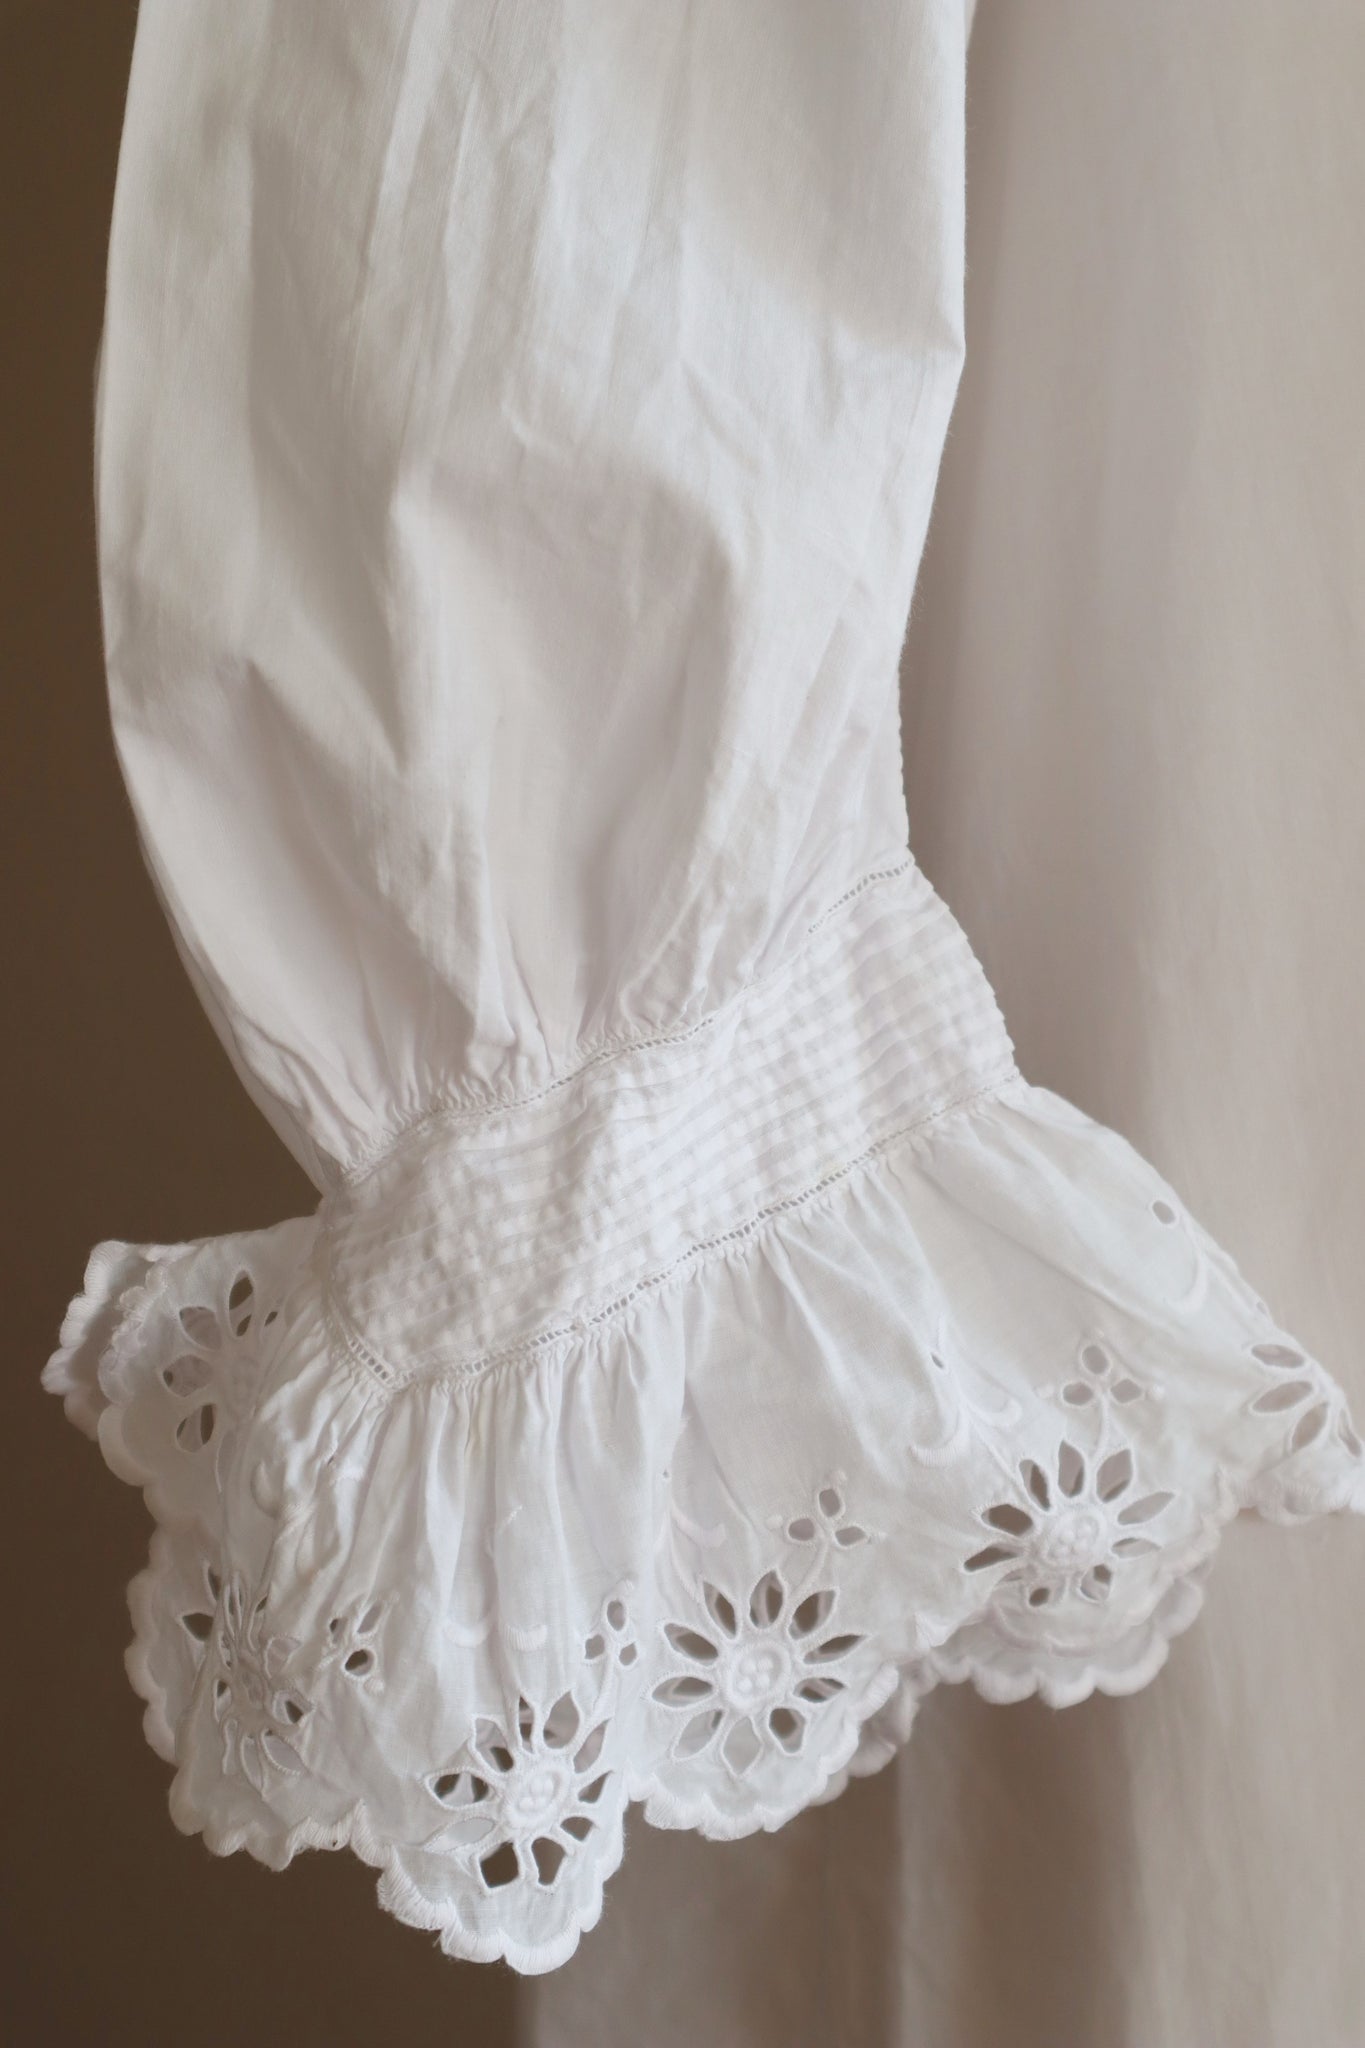 1900s Frilled Flower Cutwork Lace Pin Tuck Big Collar White Cotton Dress